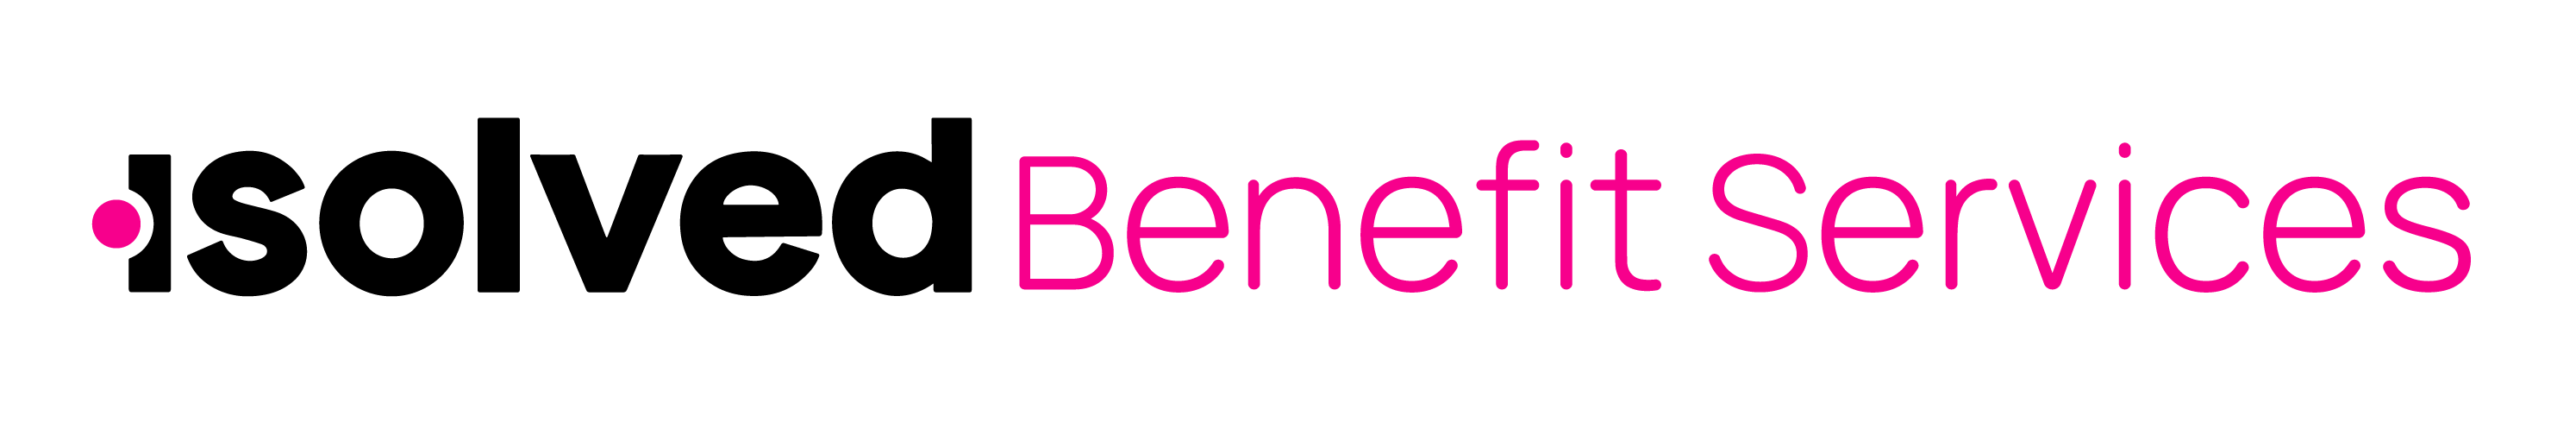 isolved Benefit Services